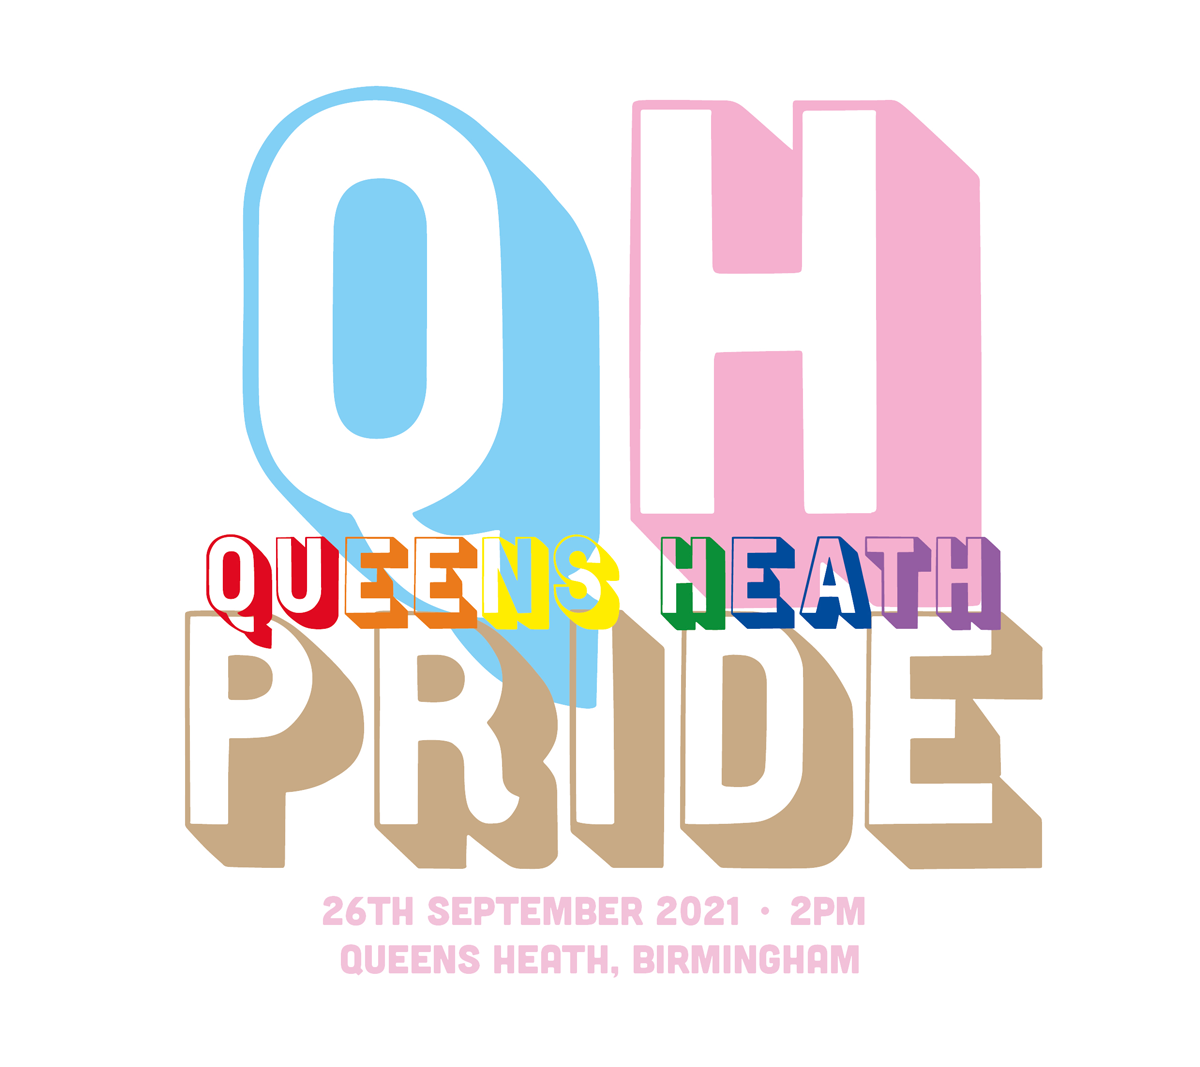 Kings Heath to host inaugural 'Queens Heath' Pride event on Sunday 26th